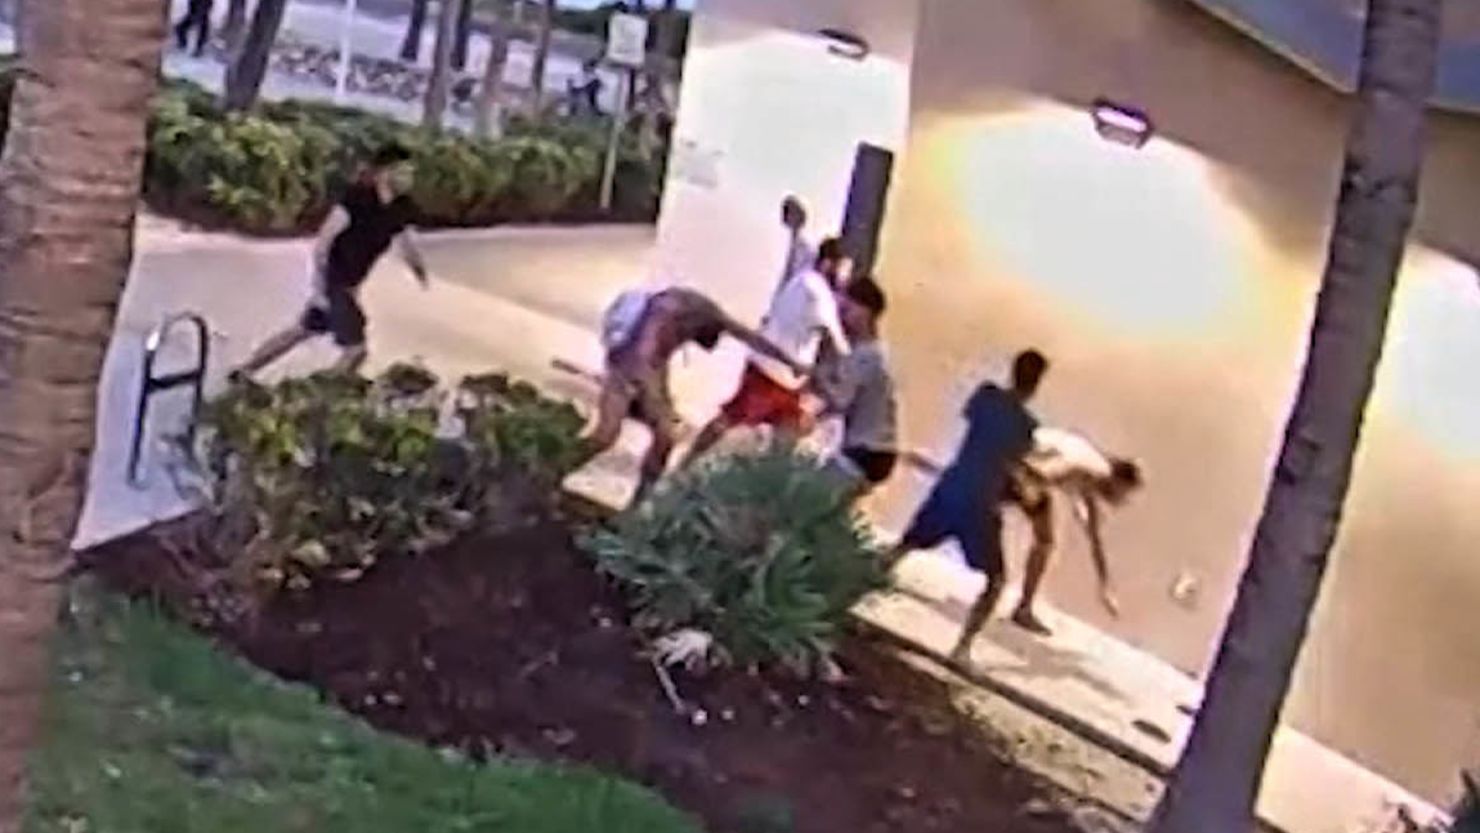 Miami Beach Police Department released surveillance video of the beating after the city's annual gay pride parade. 